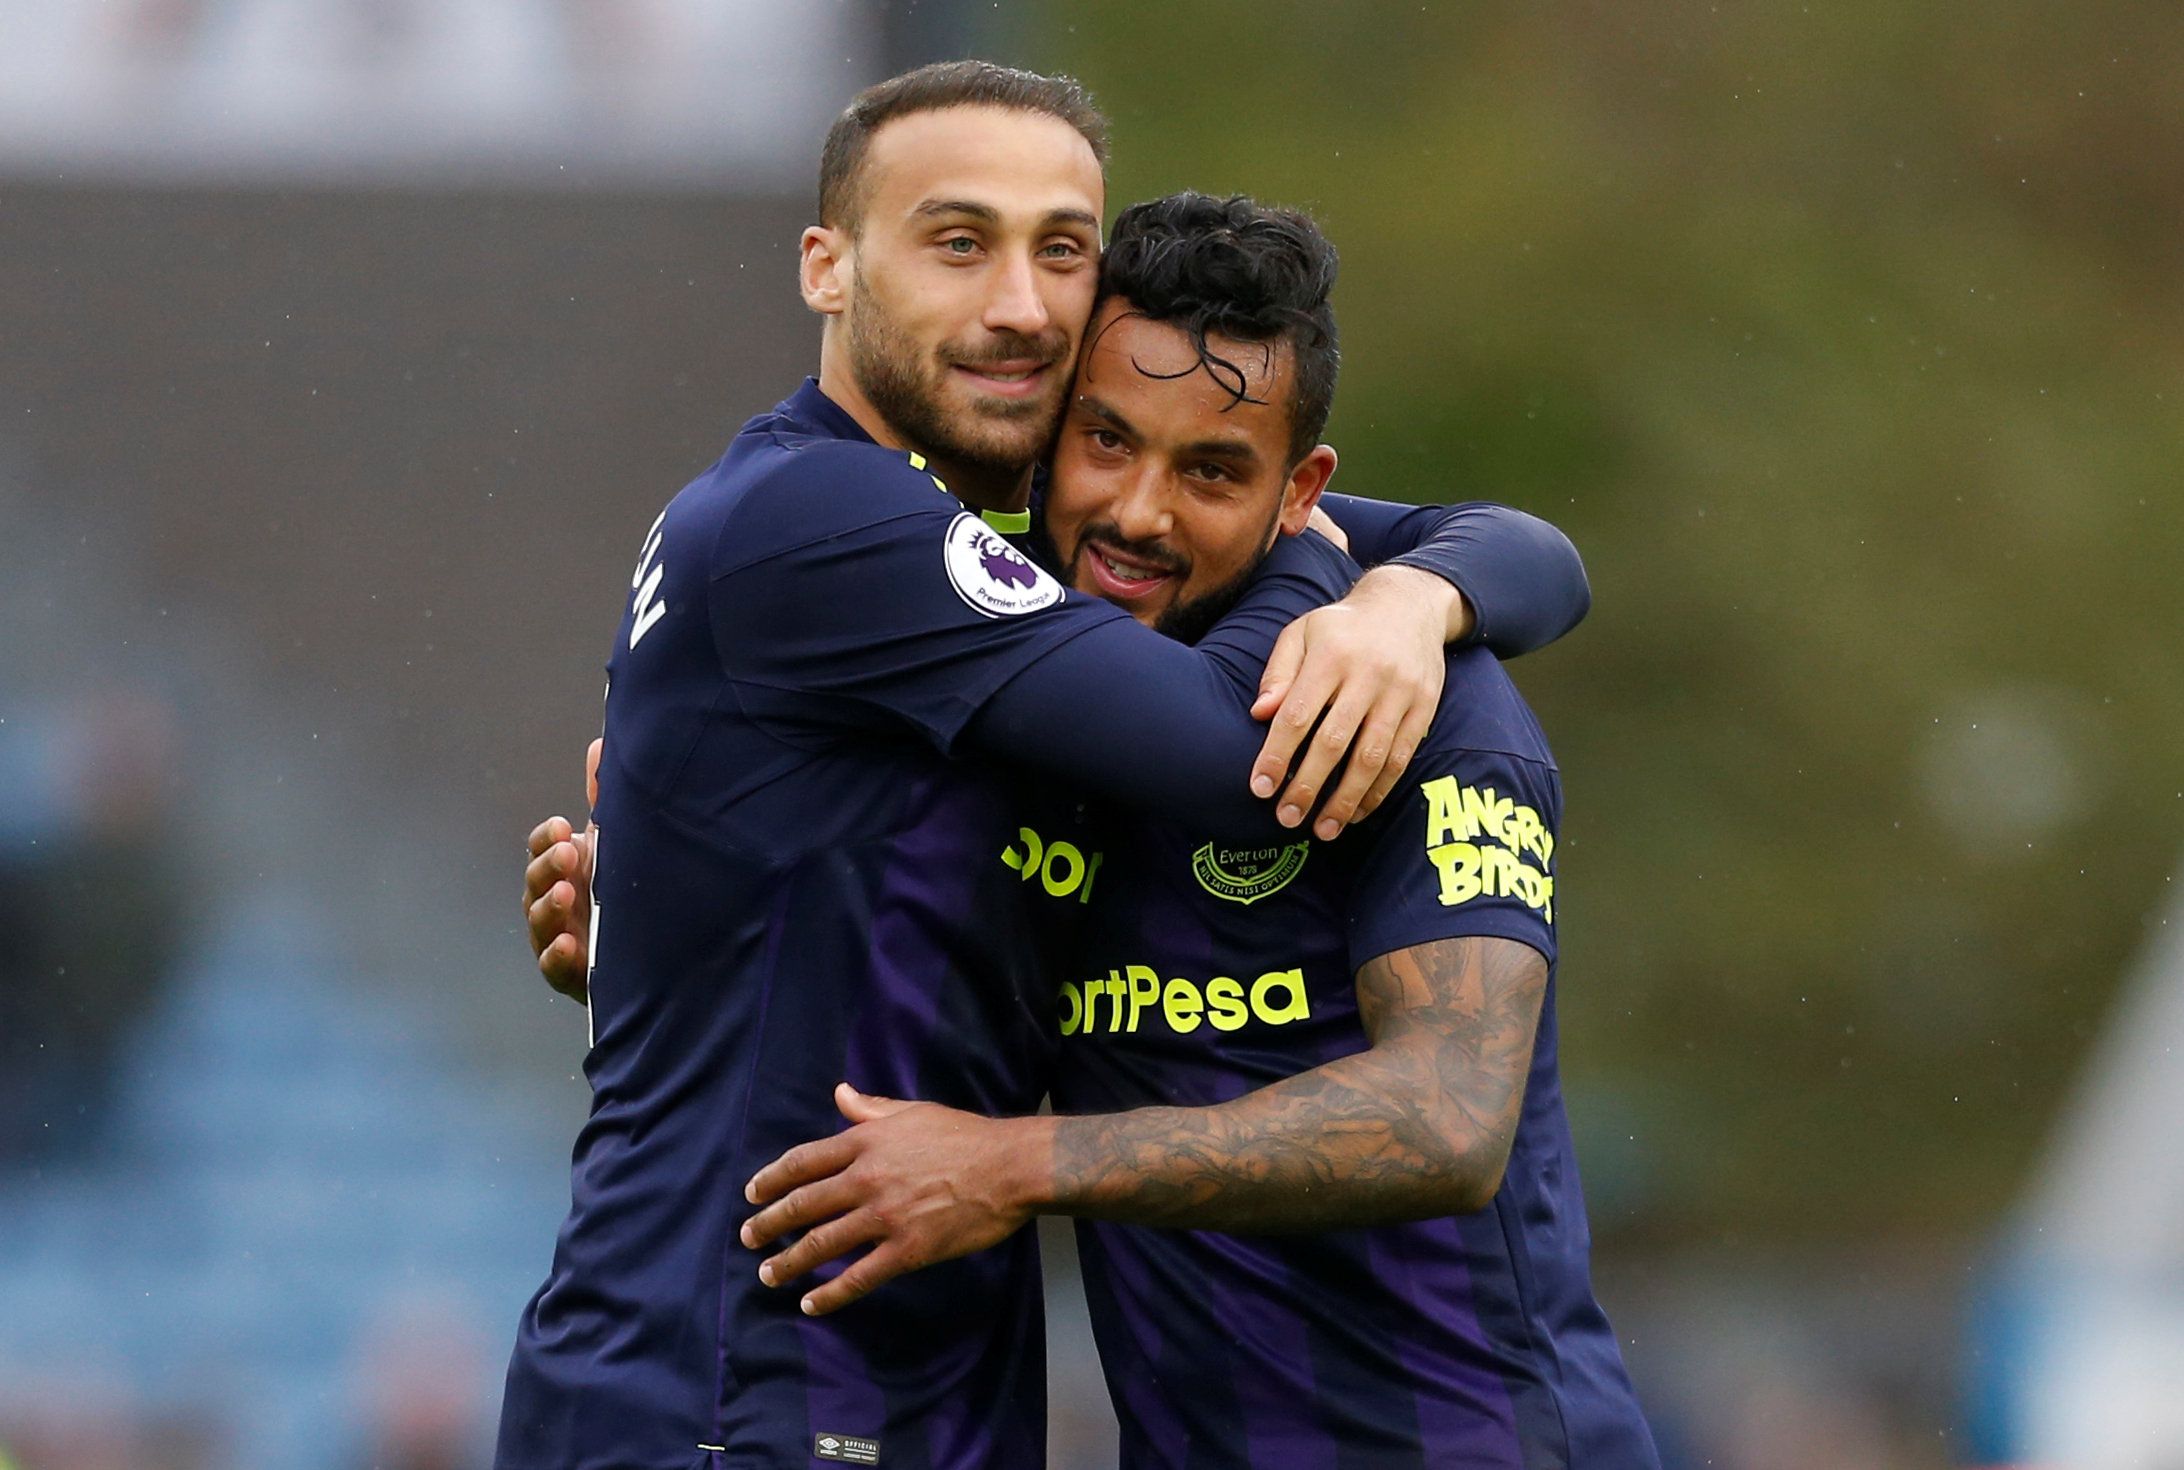 Soccer Football - Premier League - Huddersfield Town v Everton - John Smith's Stadium, Huddersfield, Britain - April 28, 2018   Everton's Theo Walcott and Cenk Tosun celebrate after the match                     Action Images via Reuters/Ed Sykes    EDITORIAL USE ONLY. No use with unauthorized audio, video, data, fixture lists, club/league logos or 